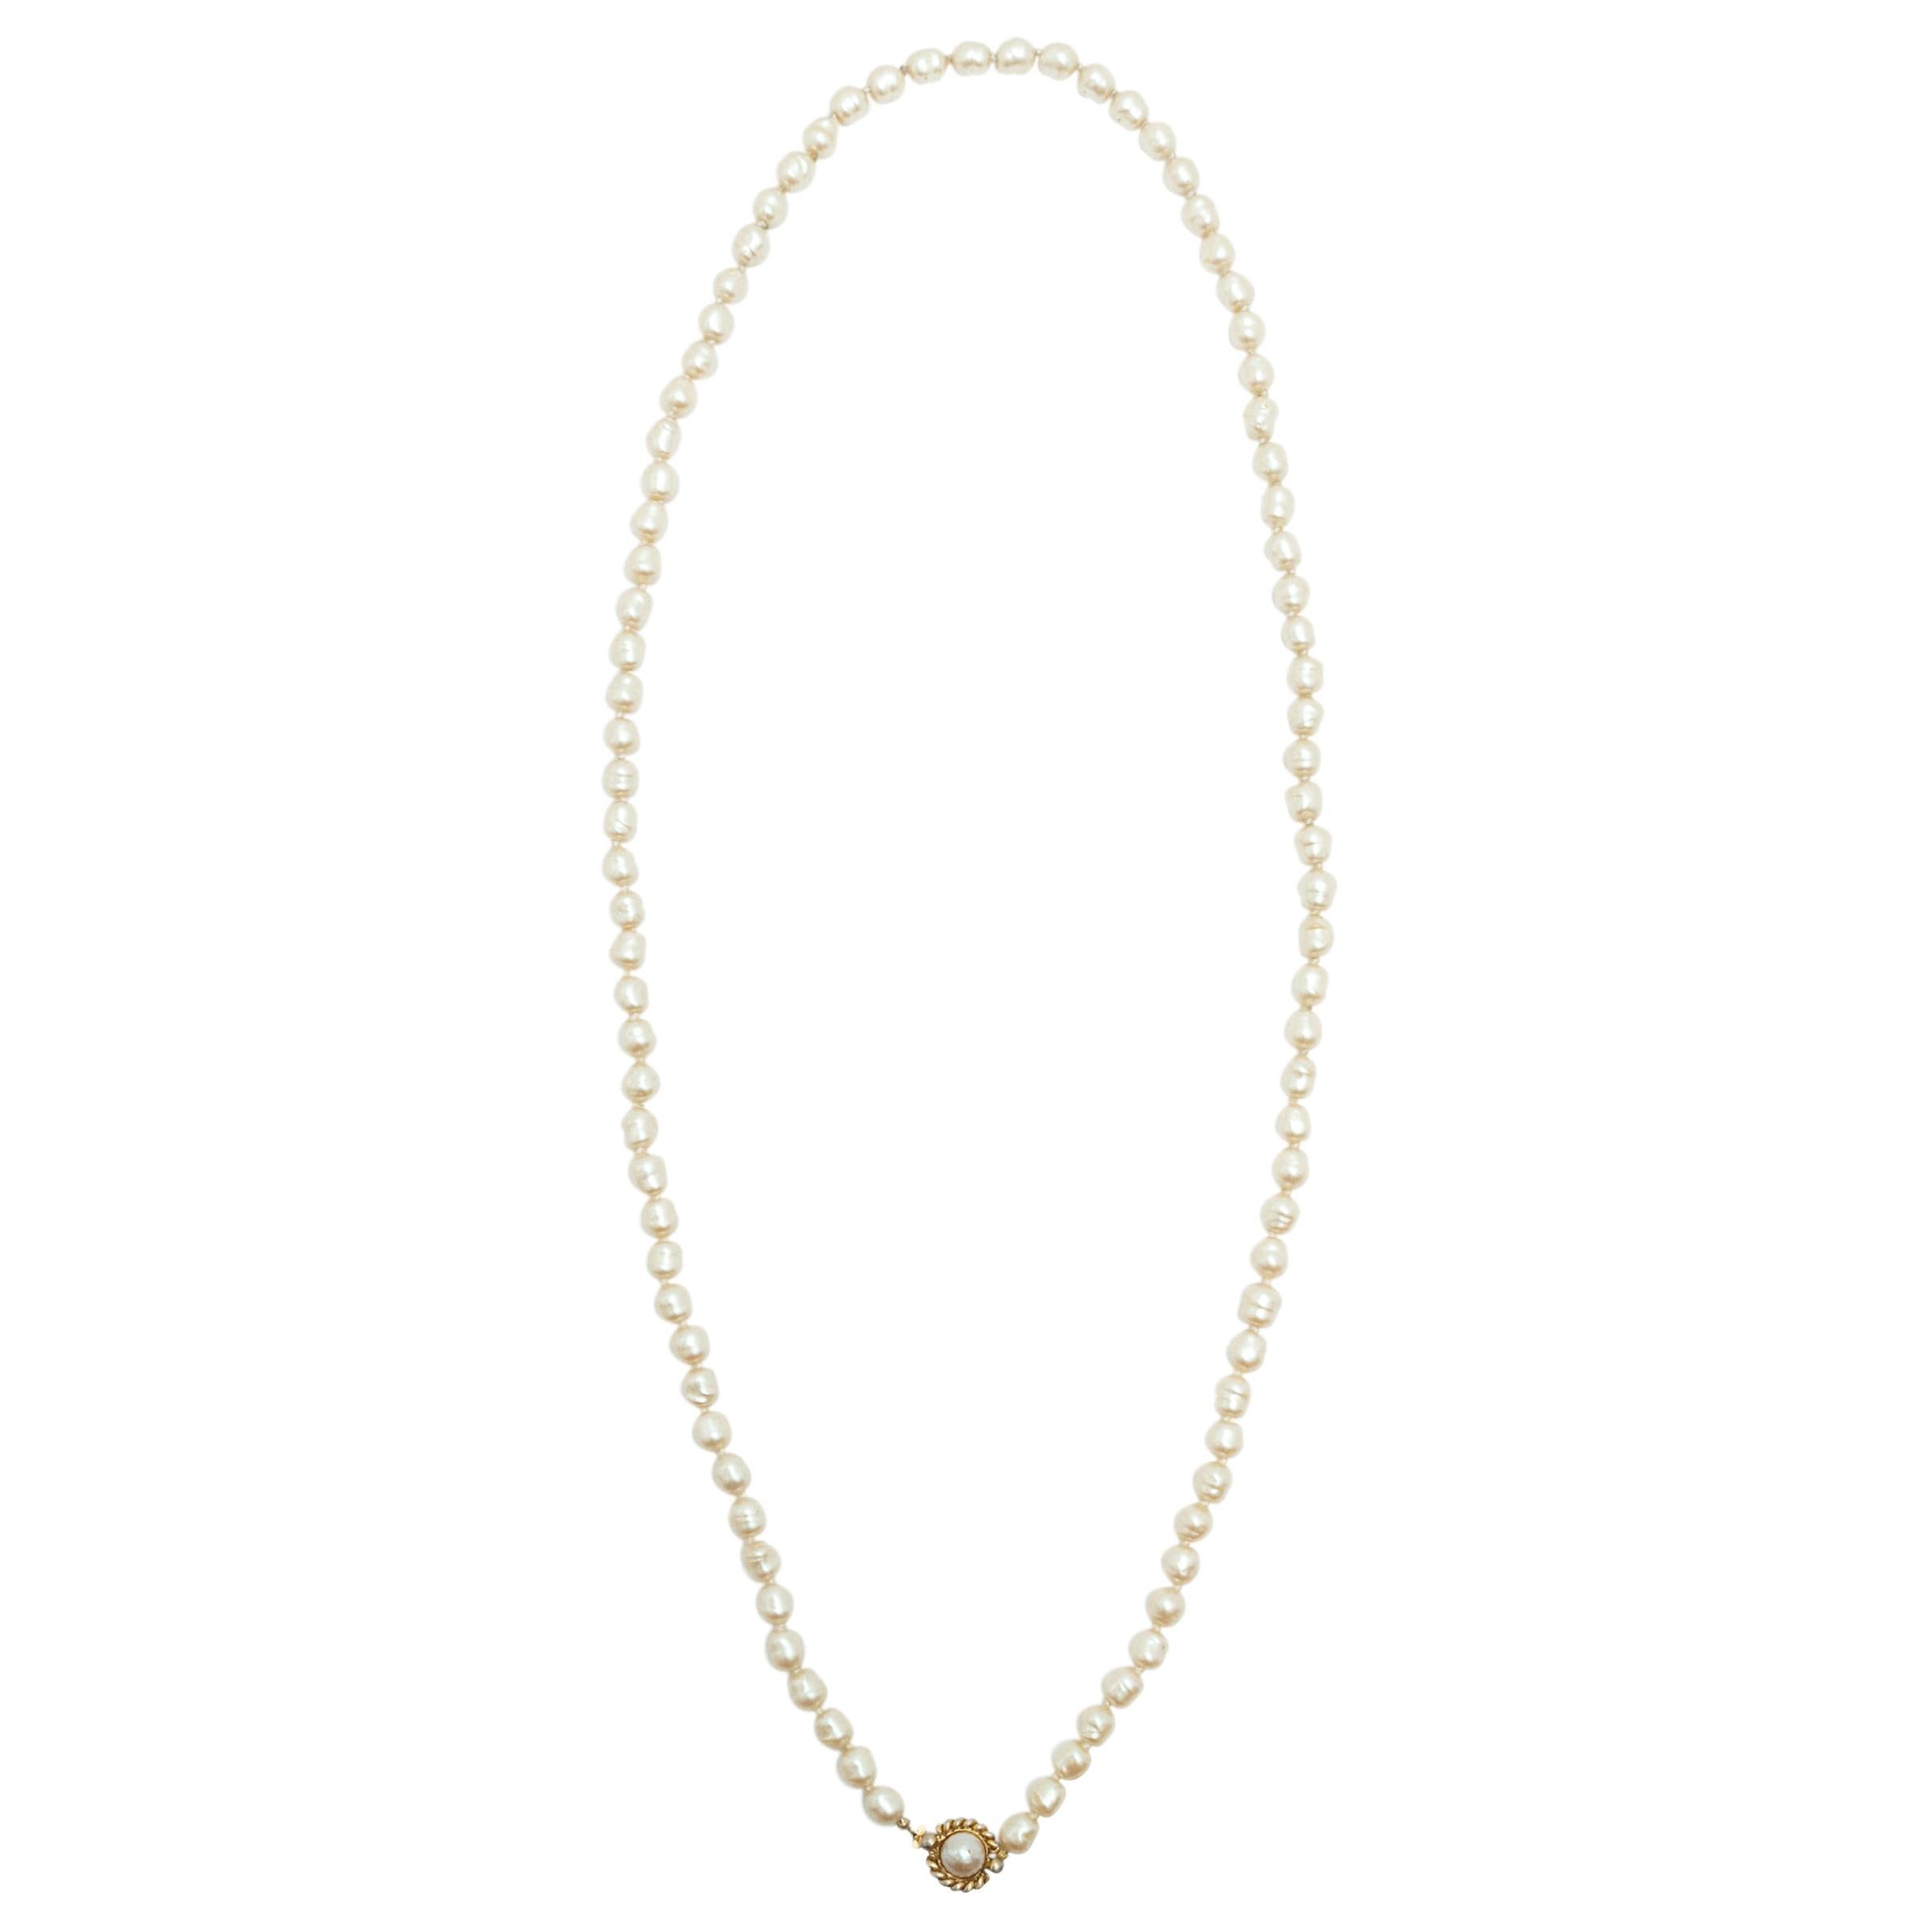 Chanel Single Faux Pearl Strand Necklace